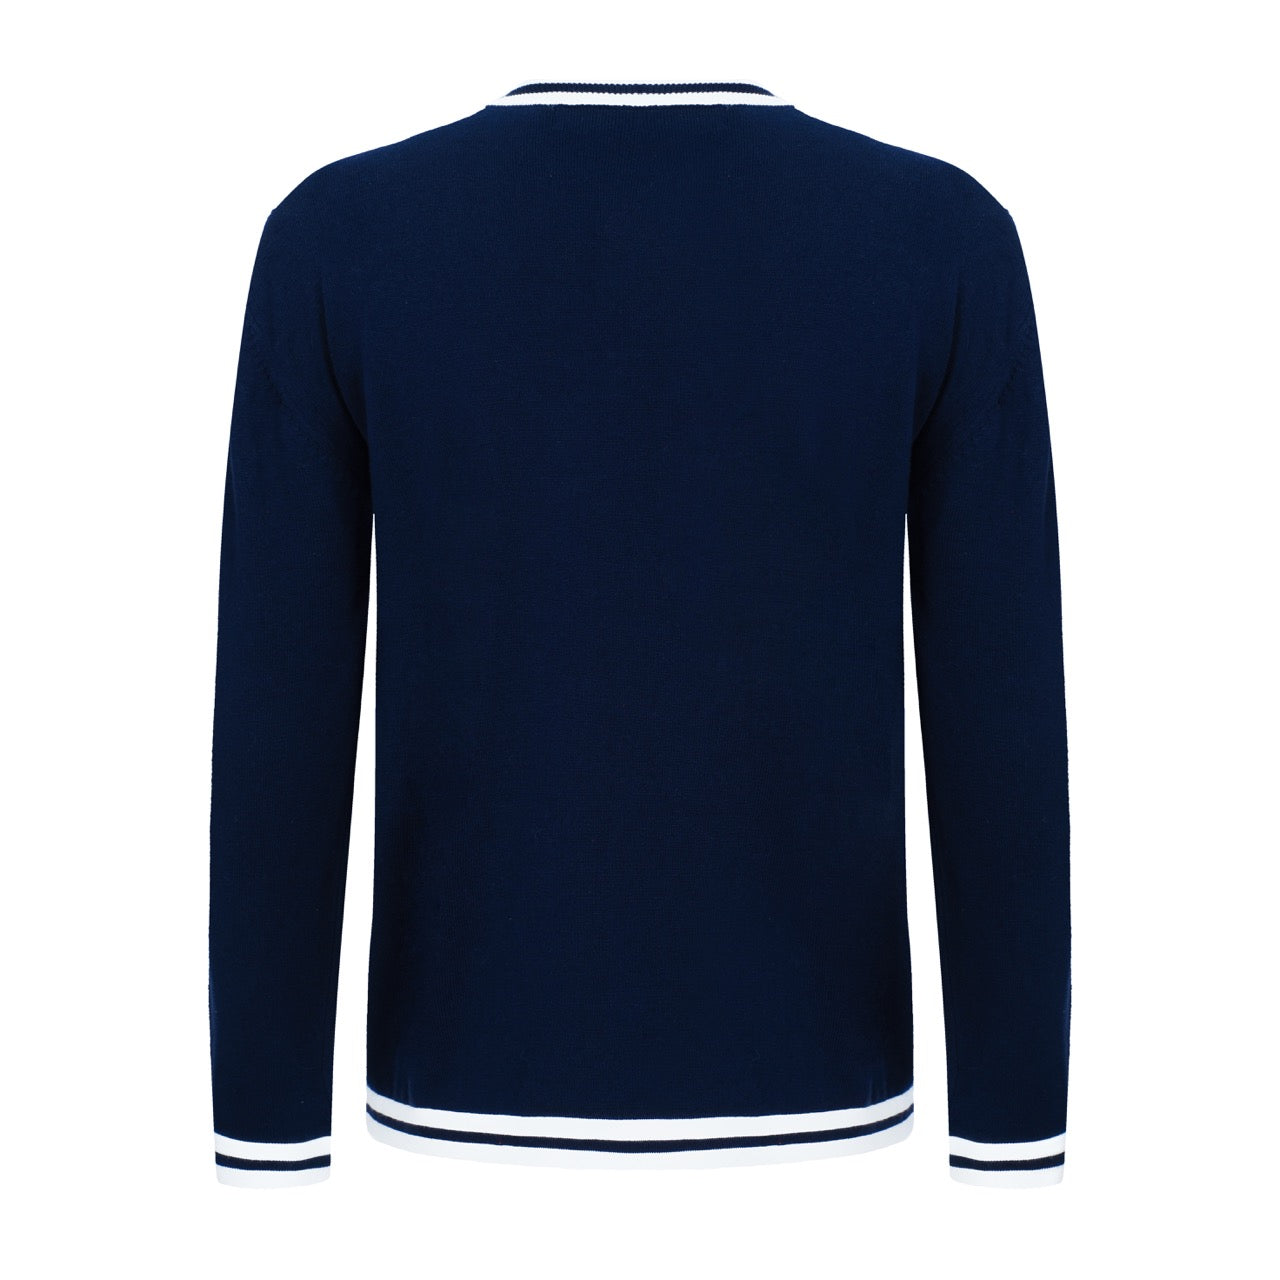 OXKNIT Men Vintage Clothing 1960s Mod Style Casual Navy Blue Knit Long Sleeve Solid Retro Tshirt